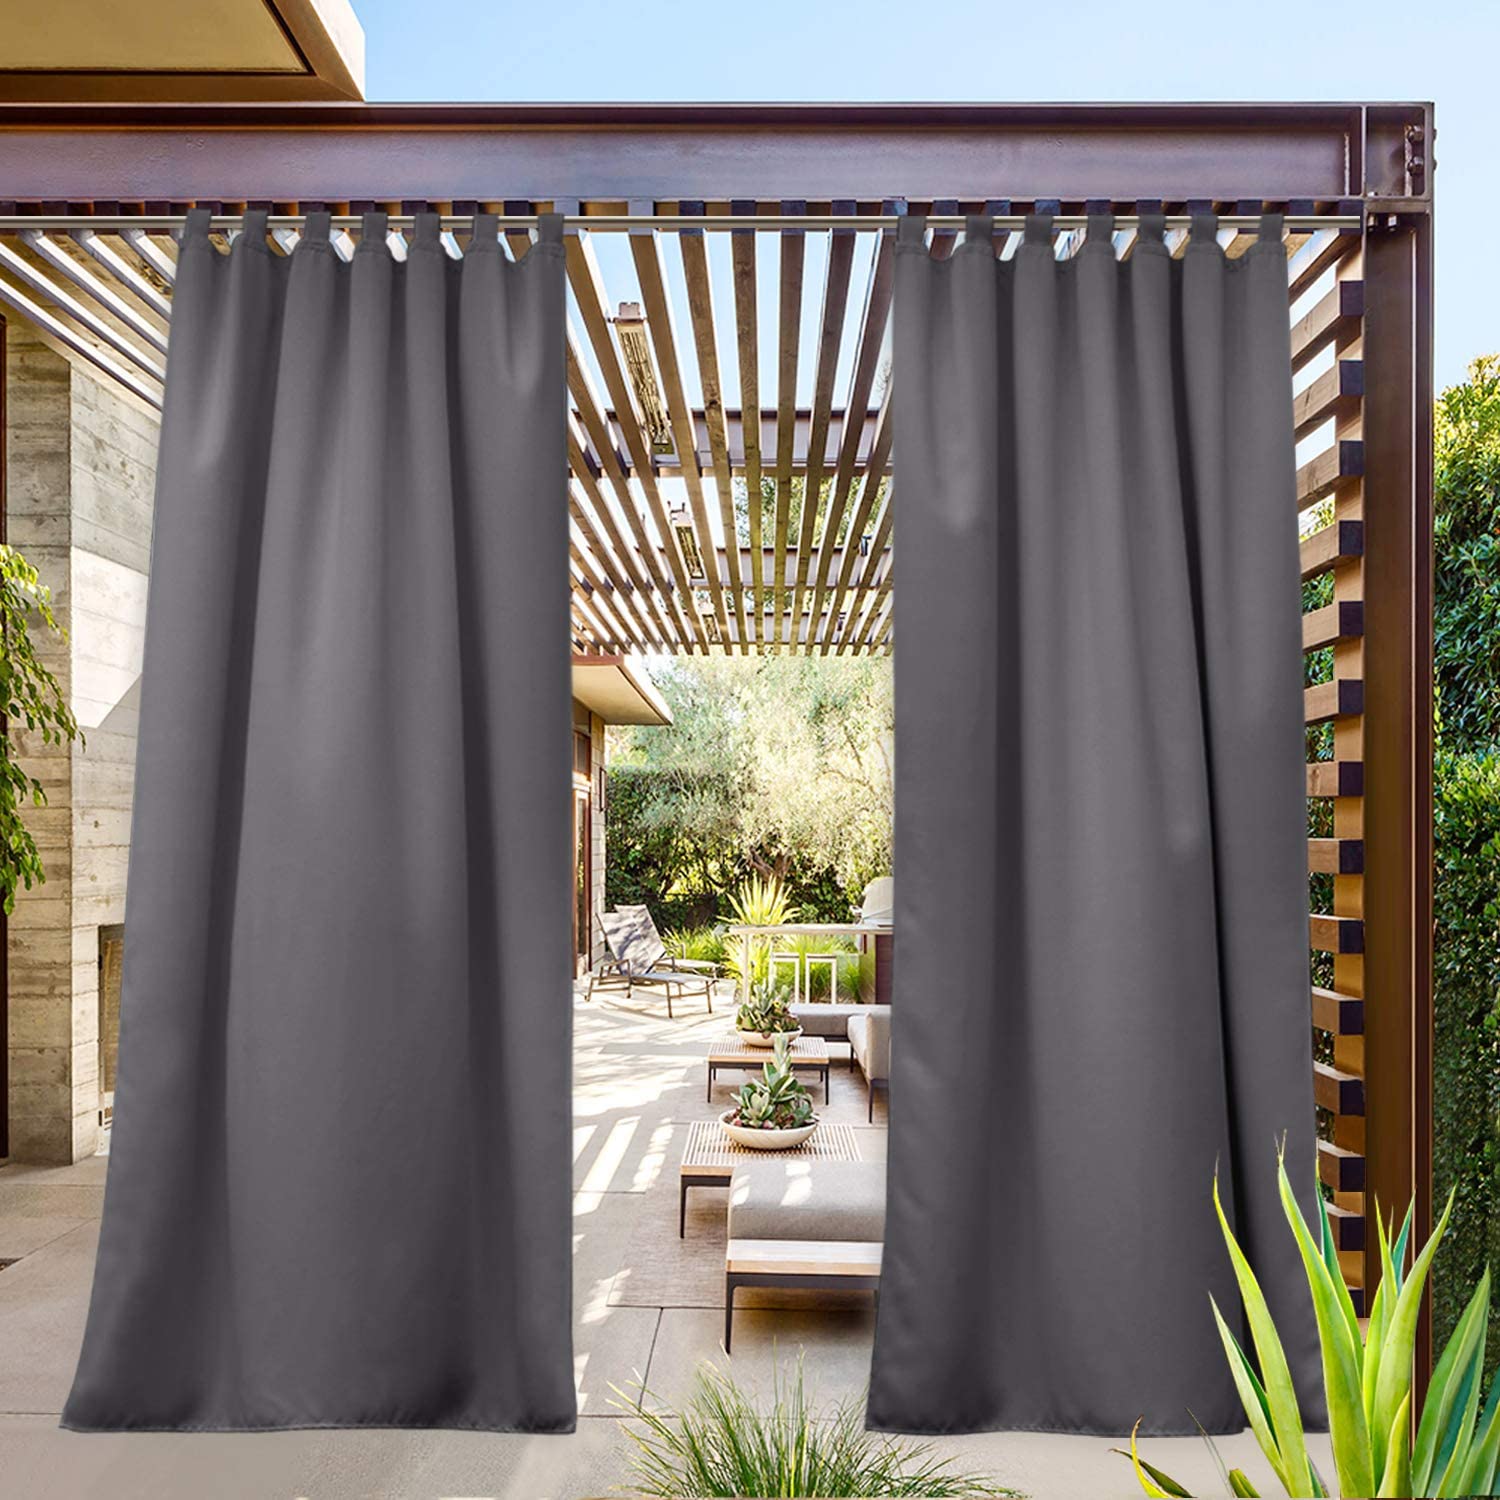 Window Treatment Top and Bottom Grommets Blackout Water Repellent & Wind Prevention Indoor Outdoor Curtain/Drape 1 Piece,52 by 84 Inch, Grey NICETOWN Outdoor Patio Curtains Waterproof 